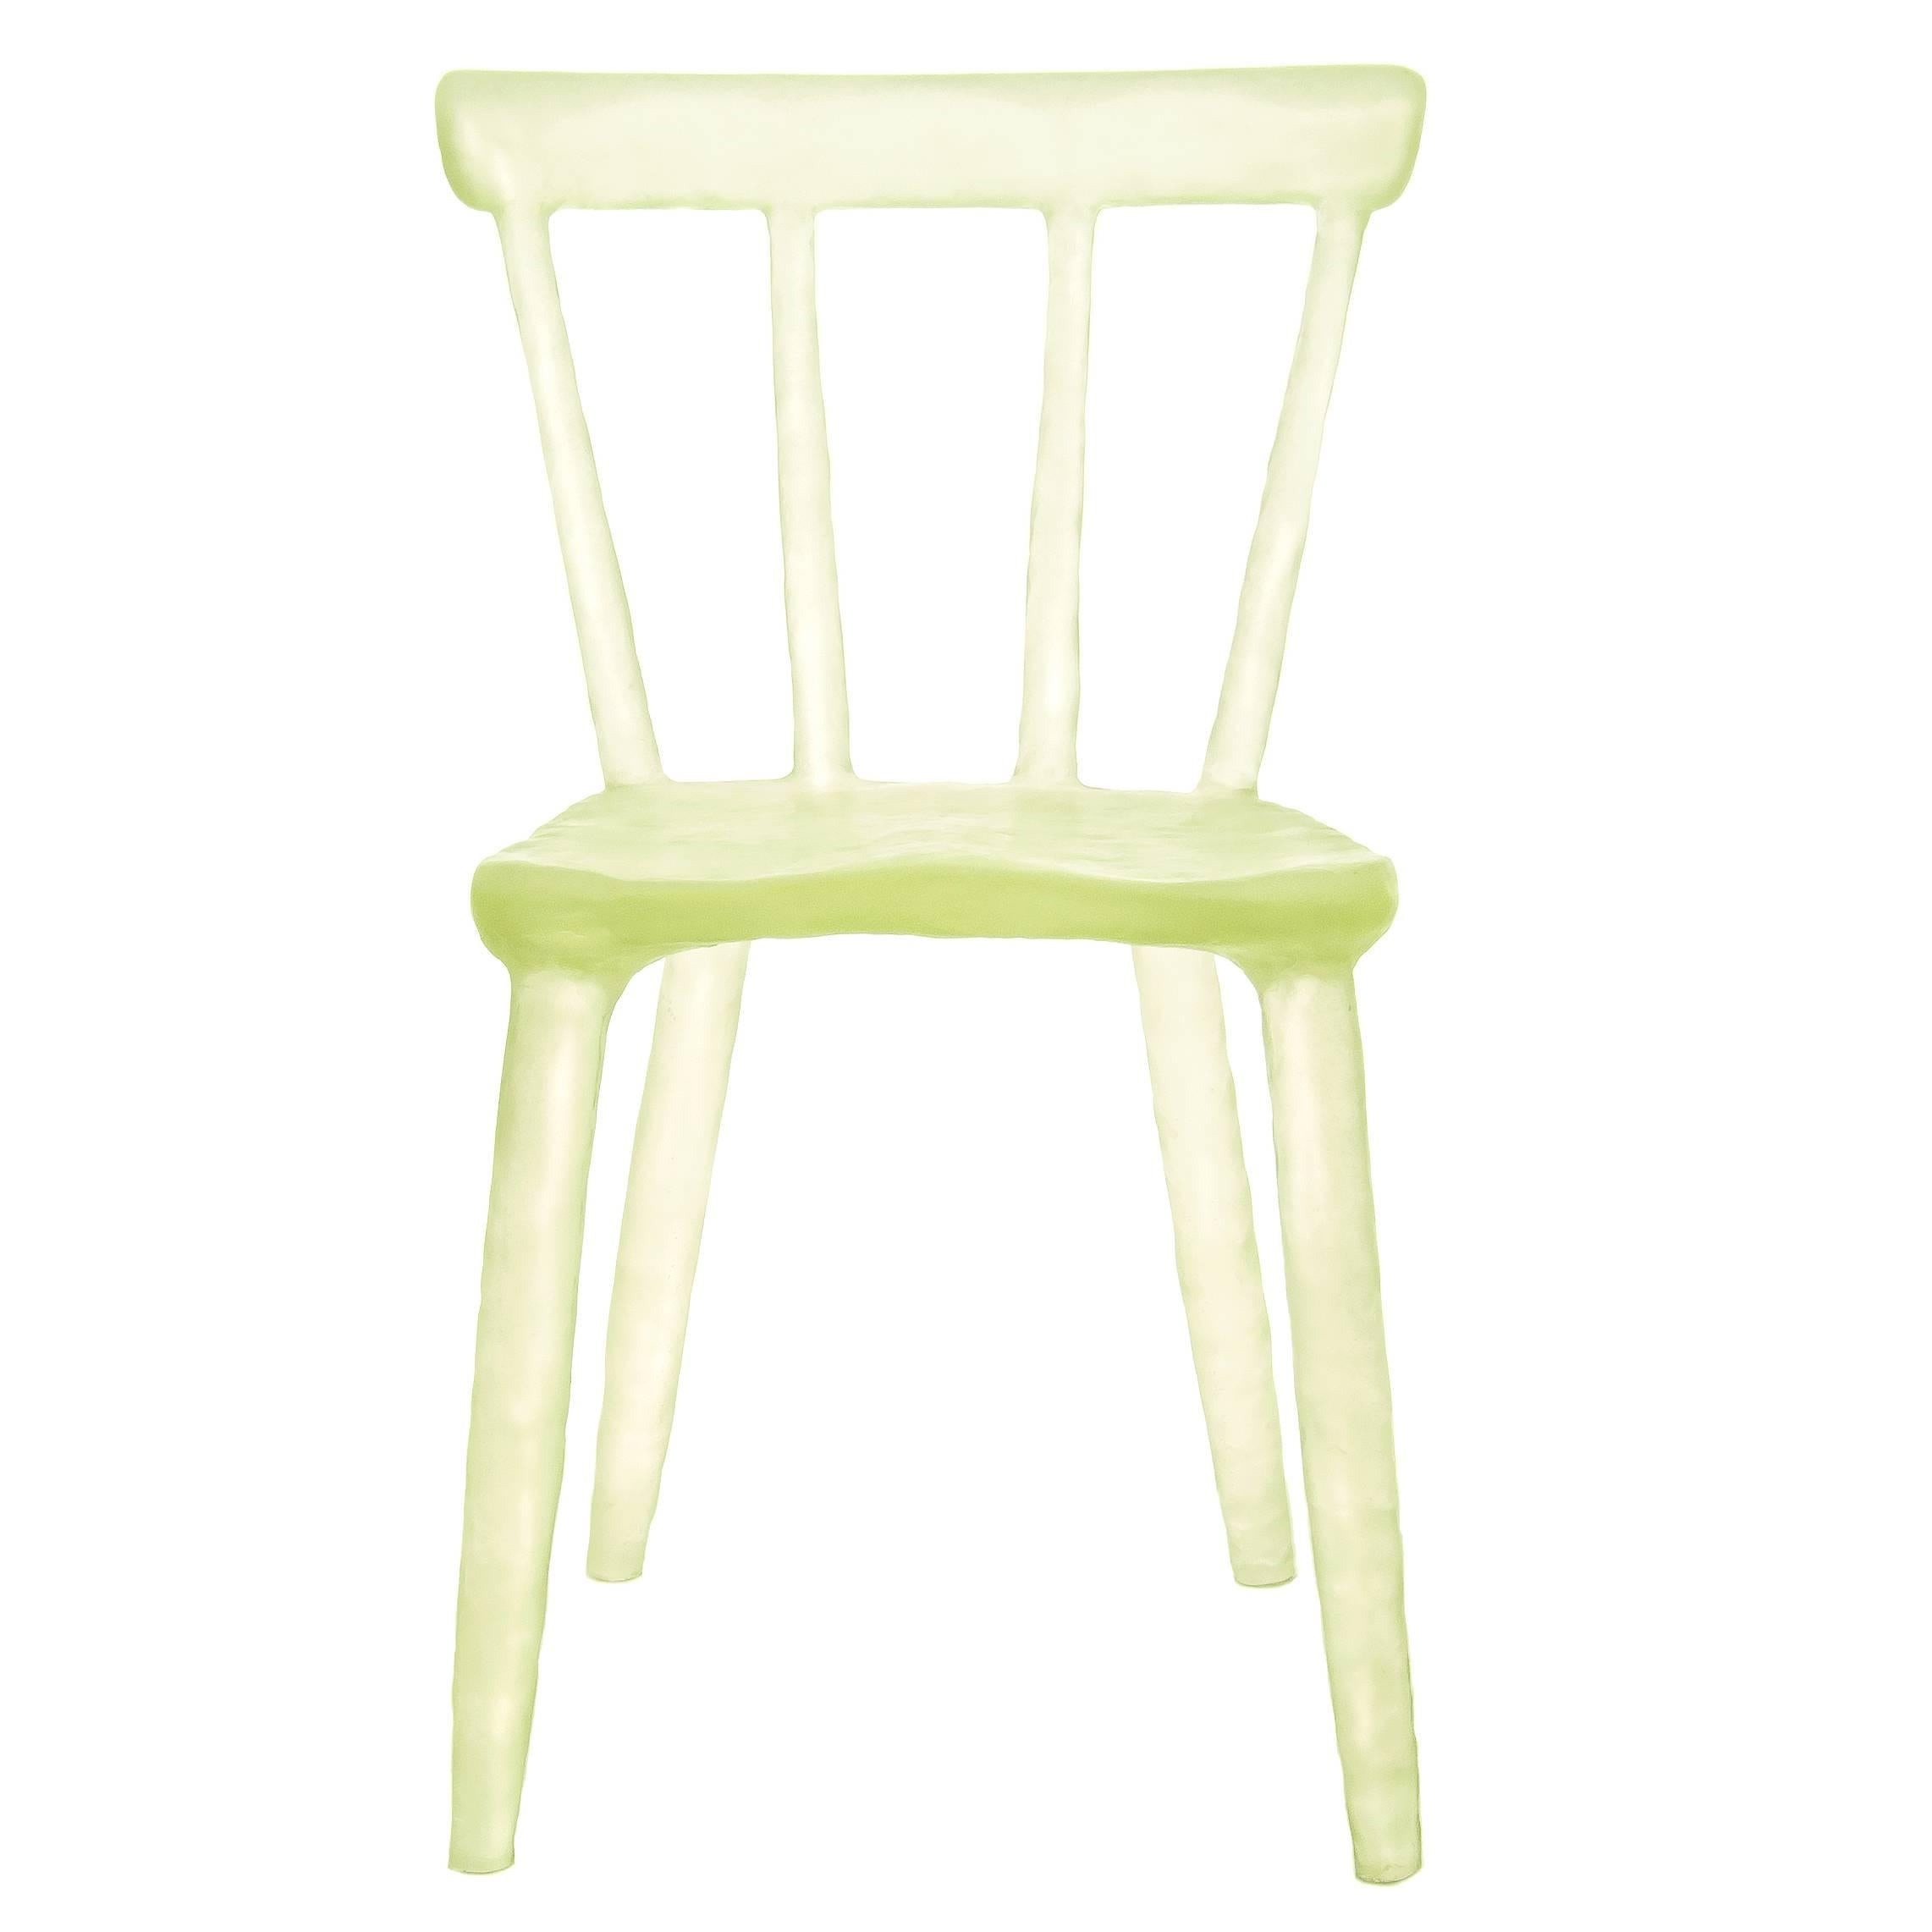 Glow Chair by Kim Markel in Yellow, Handmade from Cast Recycled Resin / Acrylic For Sale